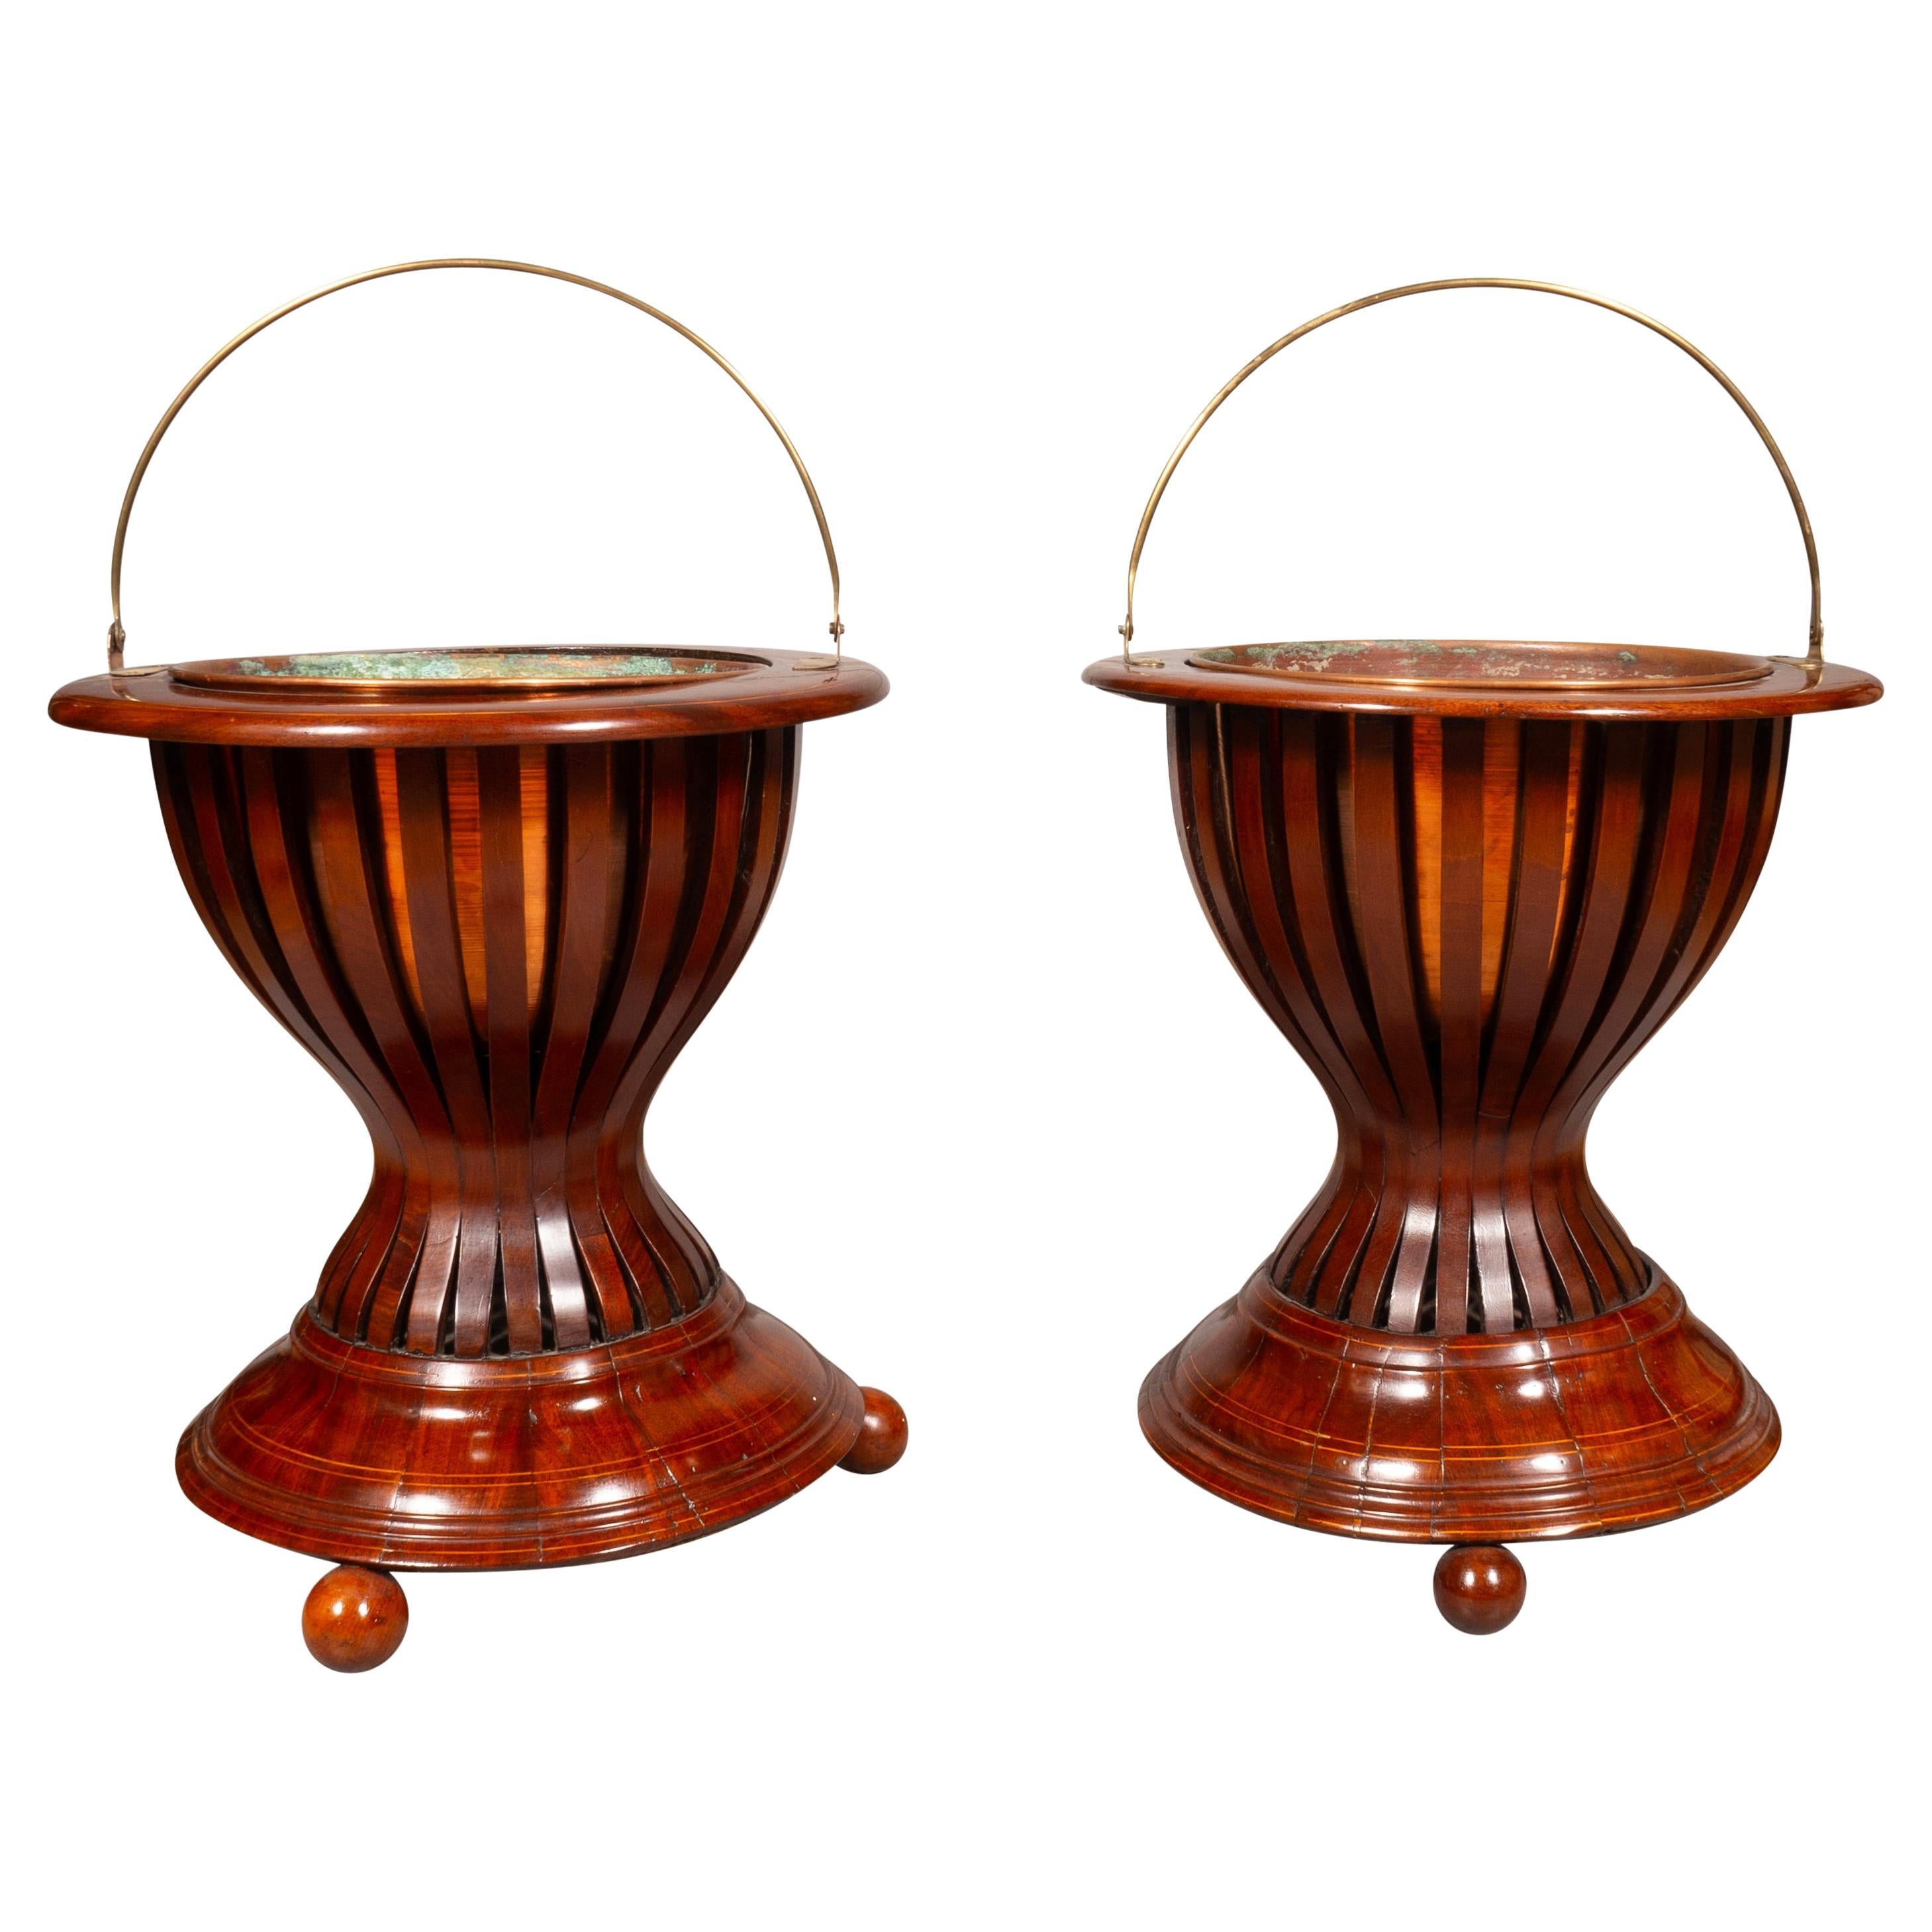 Pair Of Victorian Mahogany Jardinieres For Sale